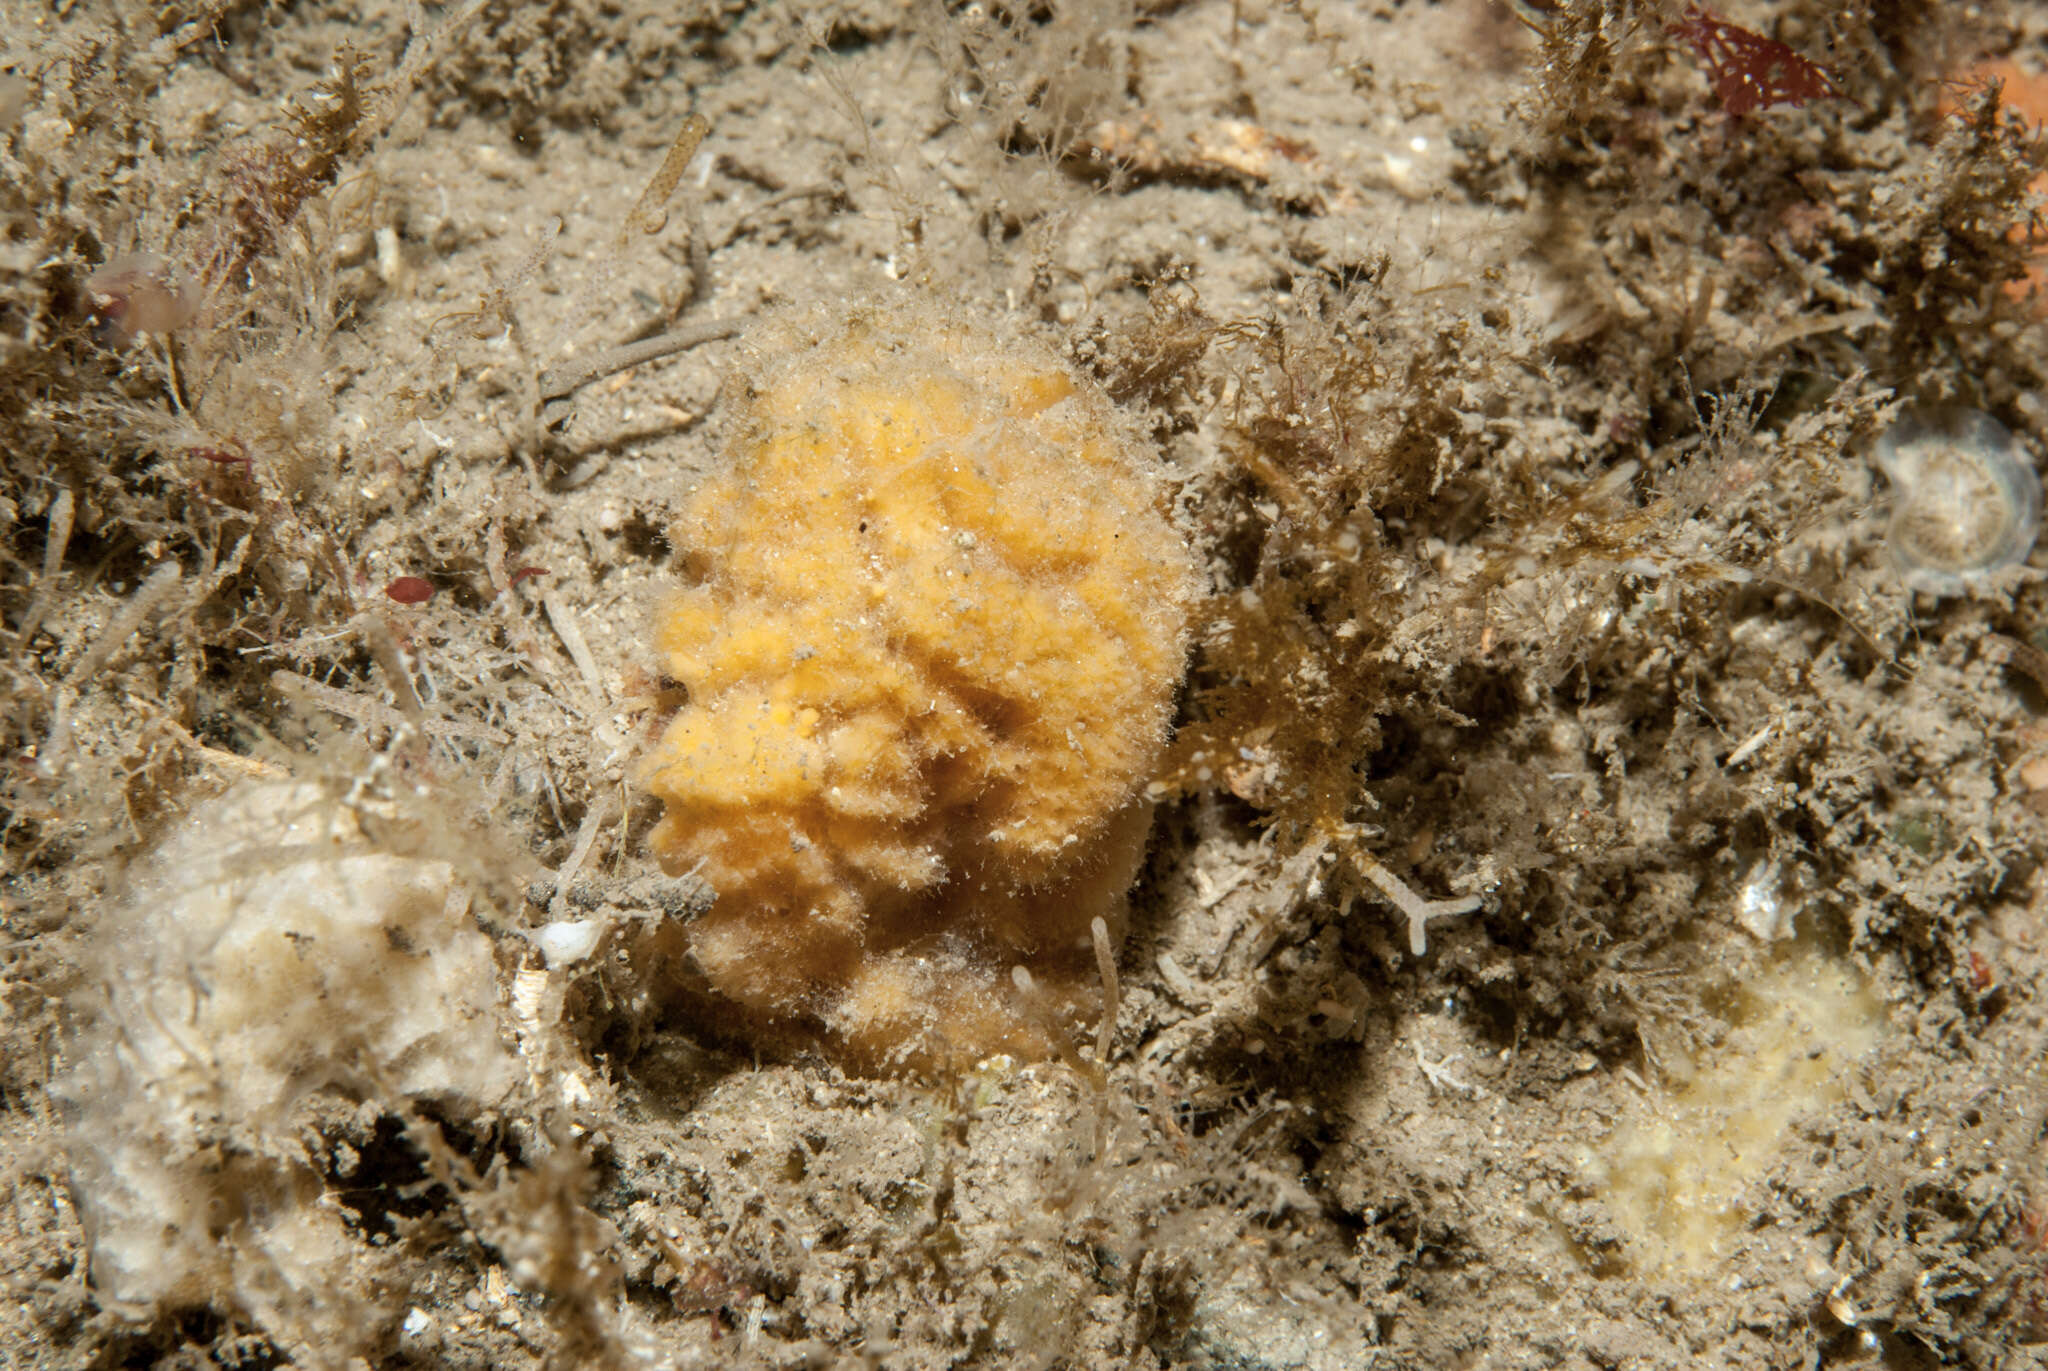 Image of Axinella parva Picton & Goodwin 2007